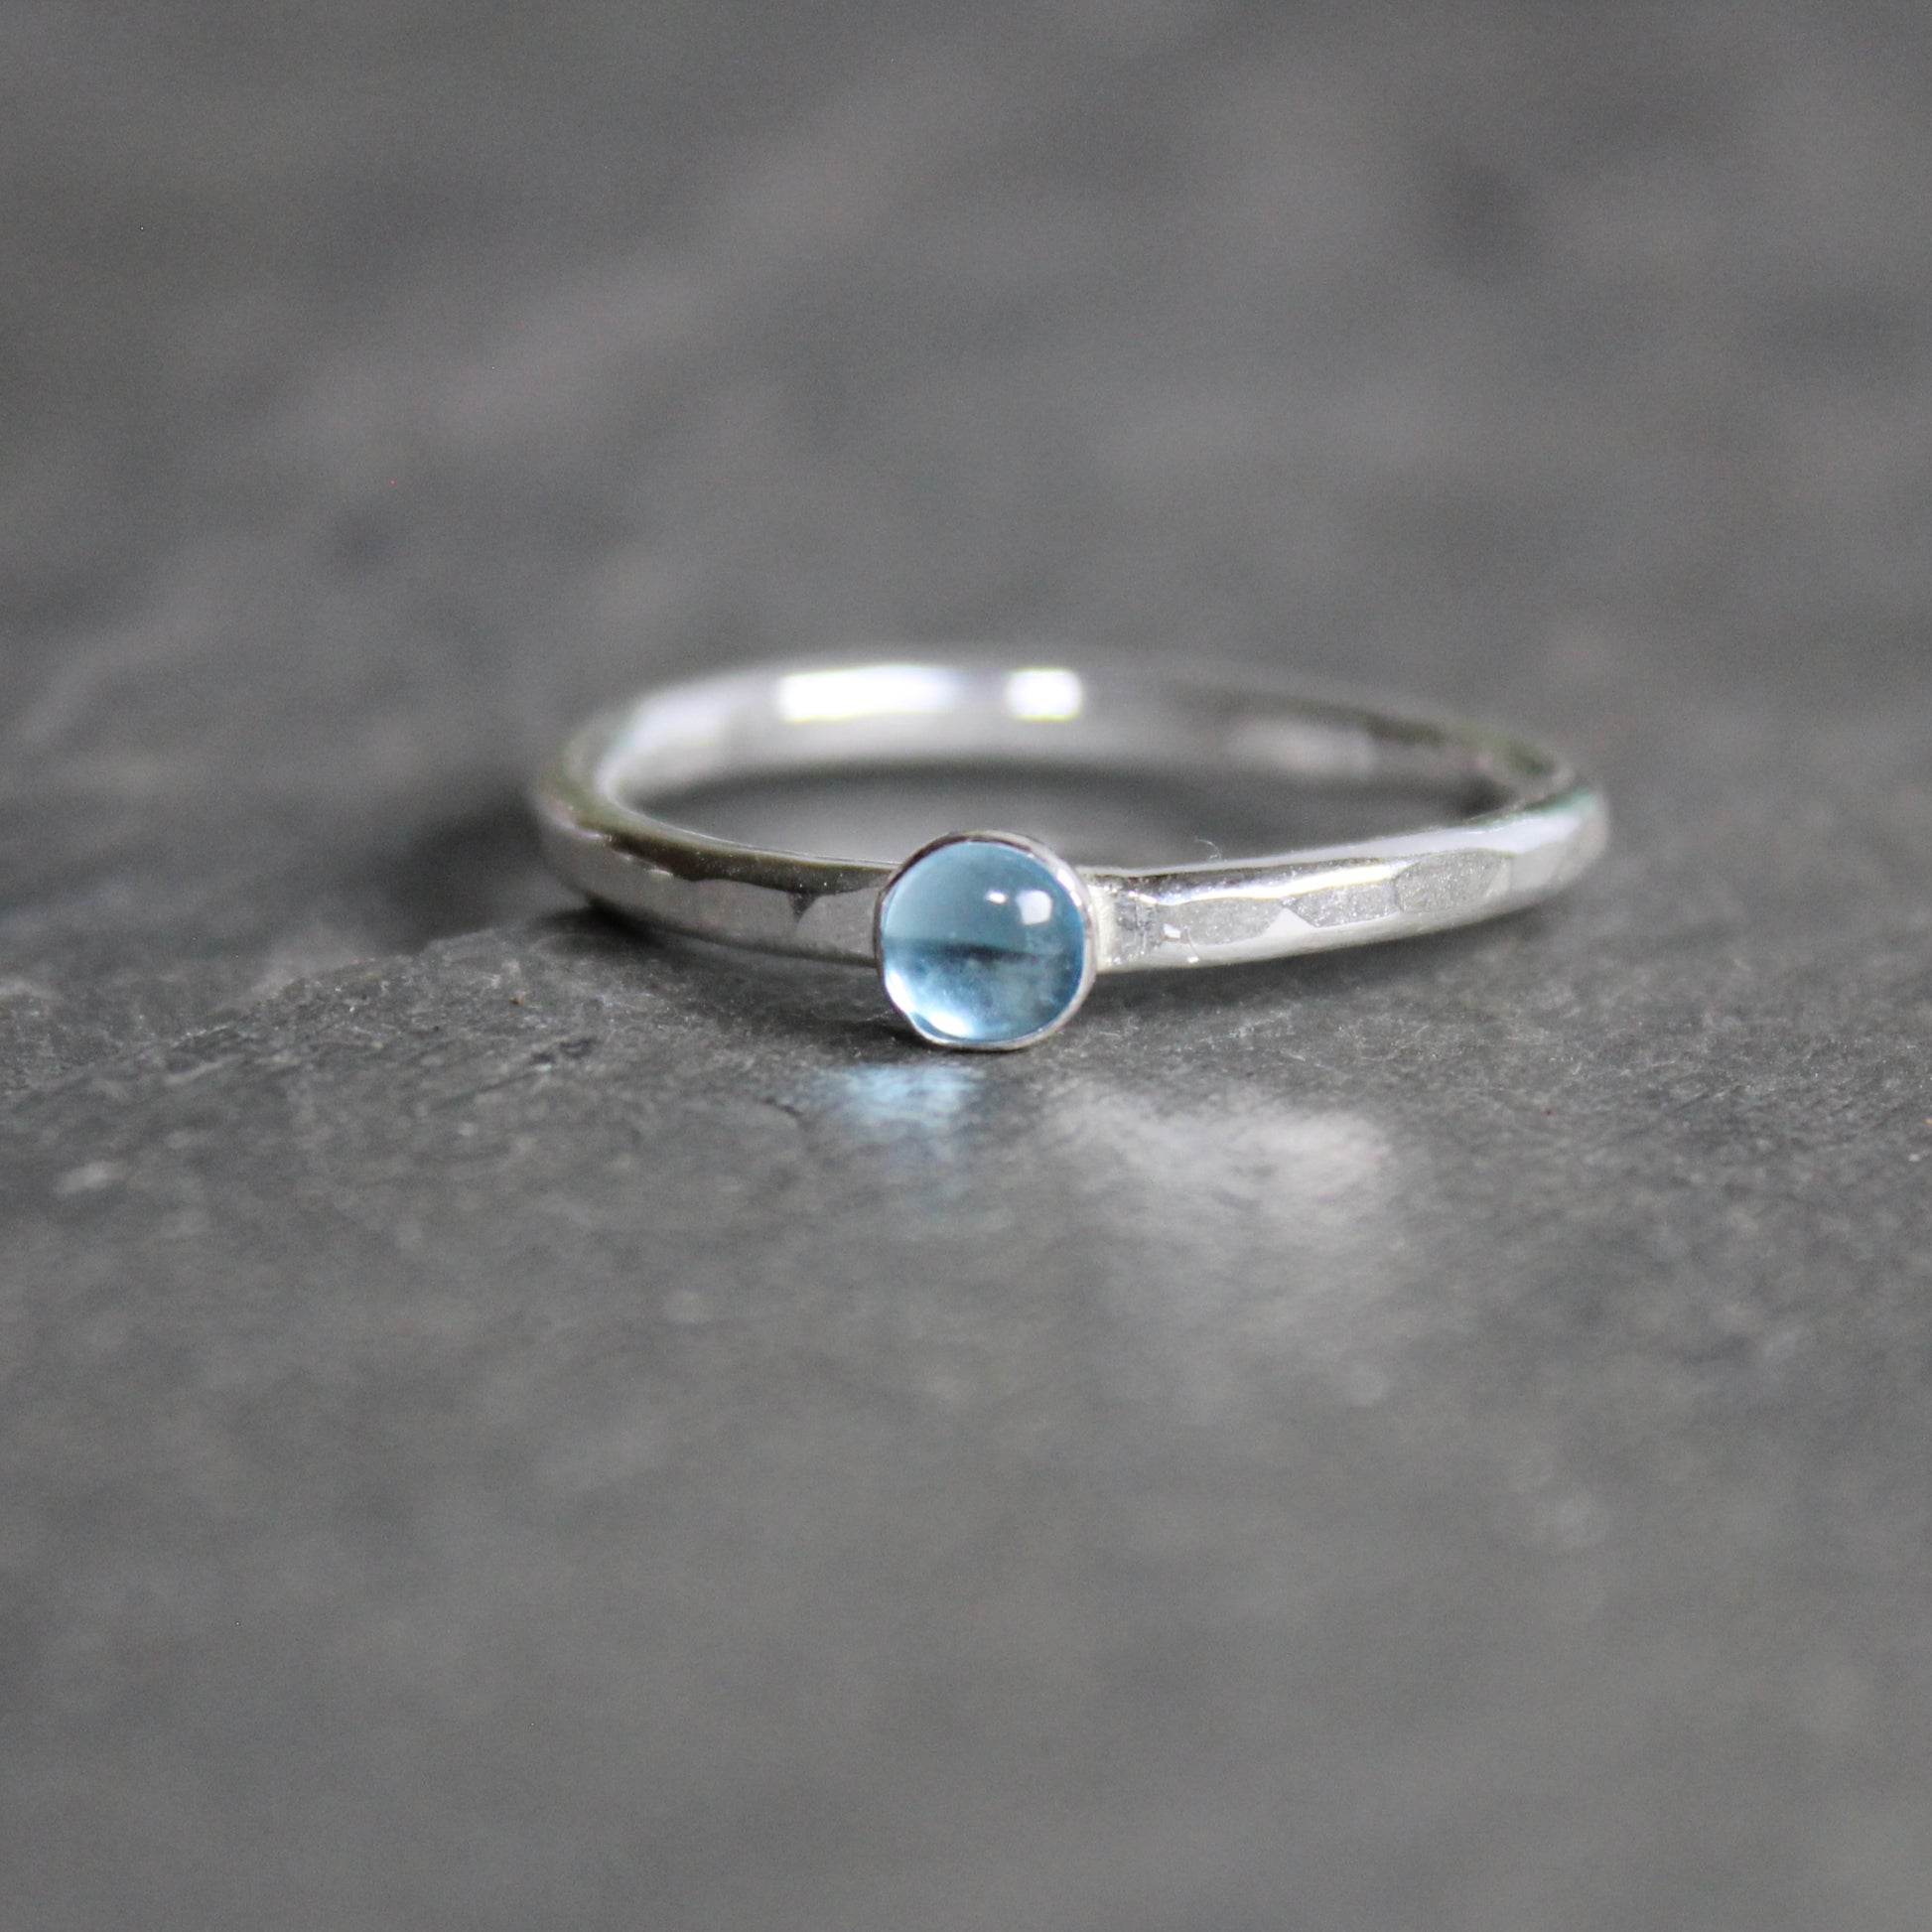 A 4mm round blue topaz cabochon set in a handmade sterling silver bezel setting on a sturdy silver band. 